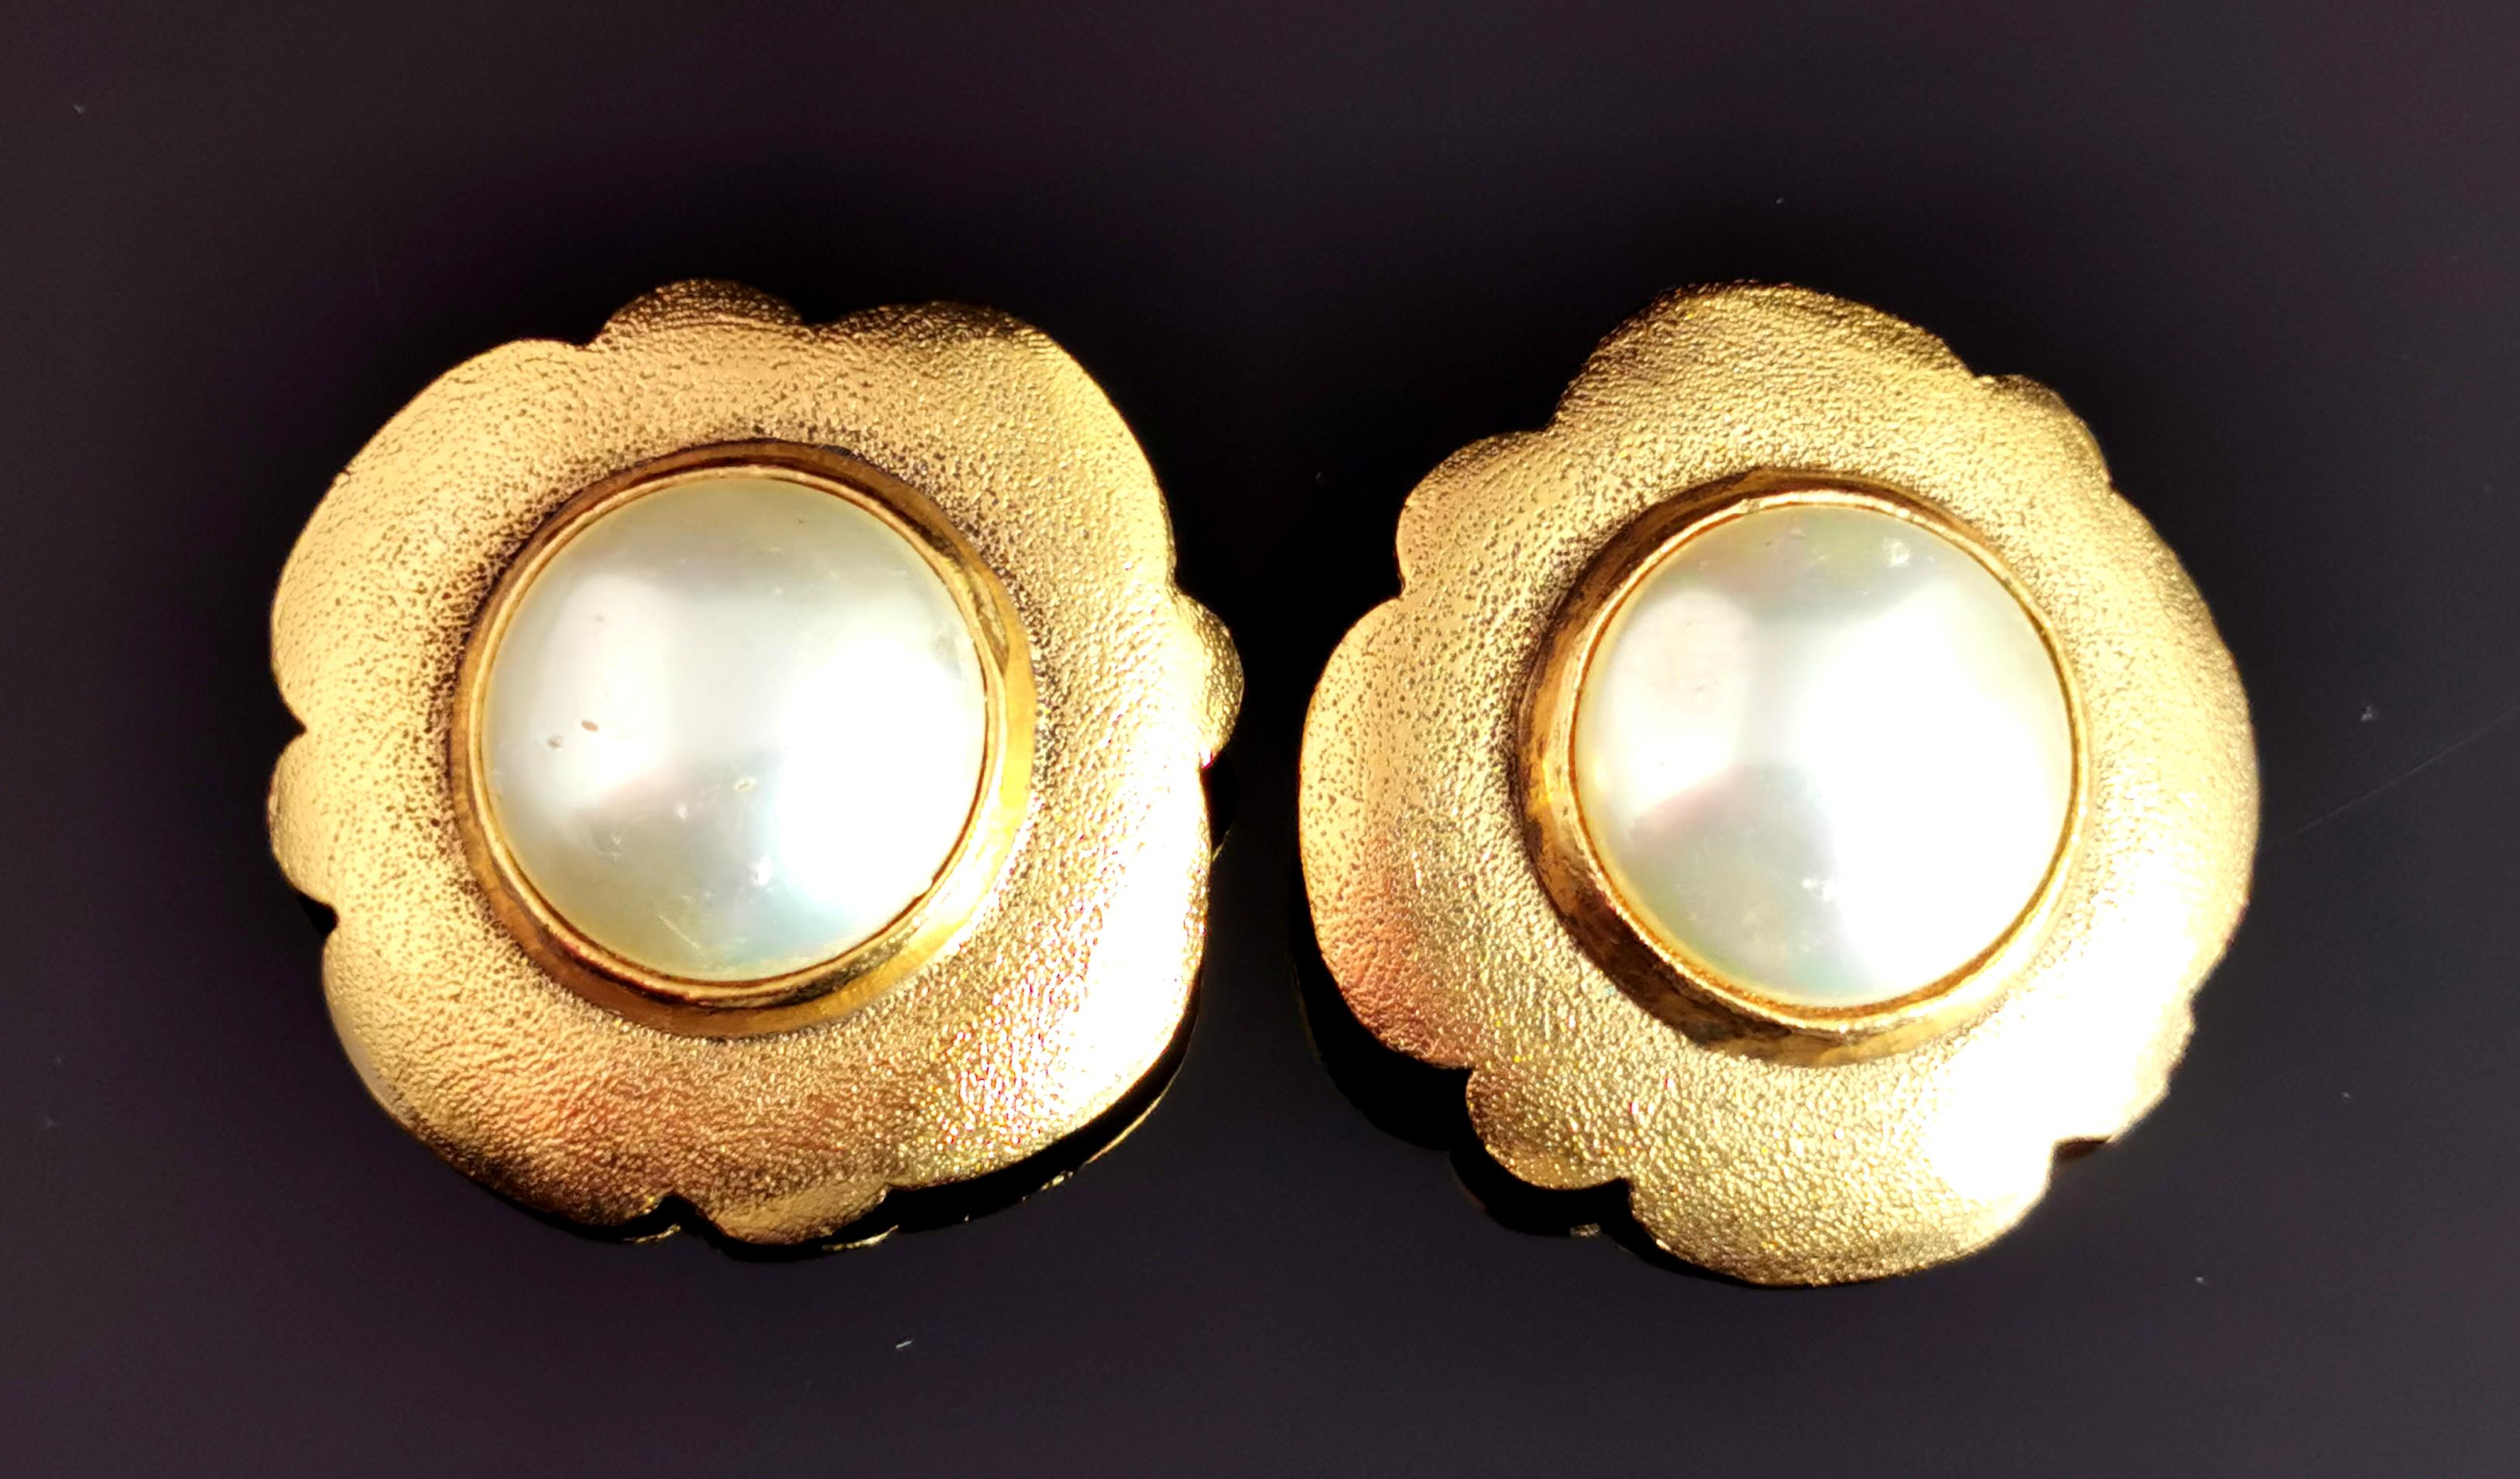 A fantastic pair of vintage Chanel clip on earrings.

A large pair of earrings in gold tone, lightly textured metal in an abstract floral shape.

Each earring is set with a large creamy lustrous faux pearl.

The earrings have a clip on fitting and